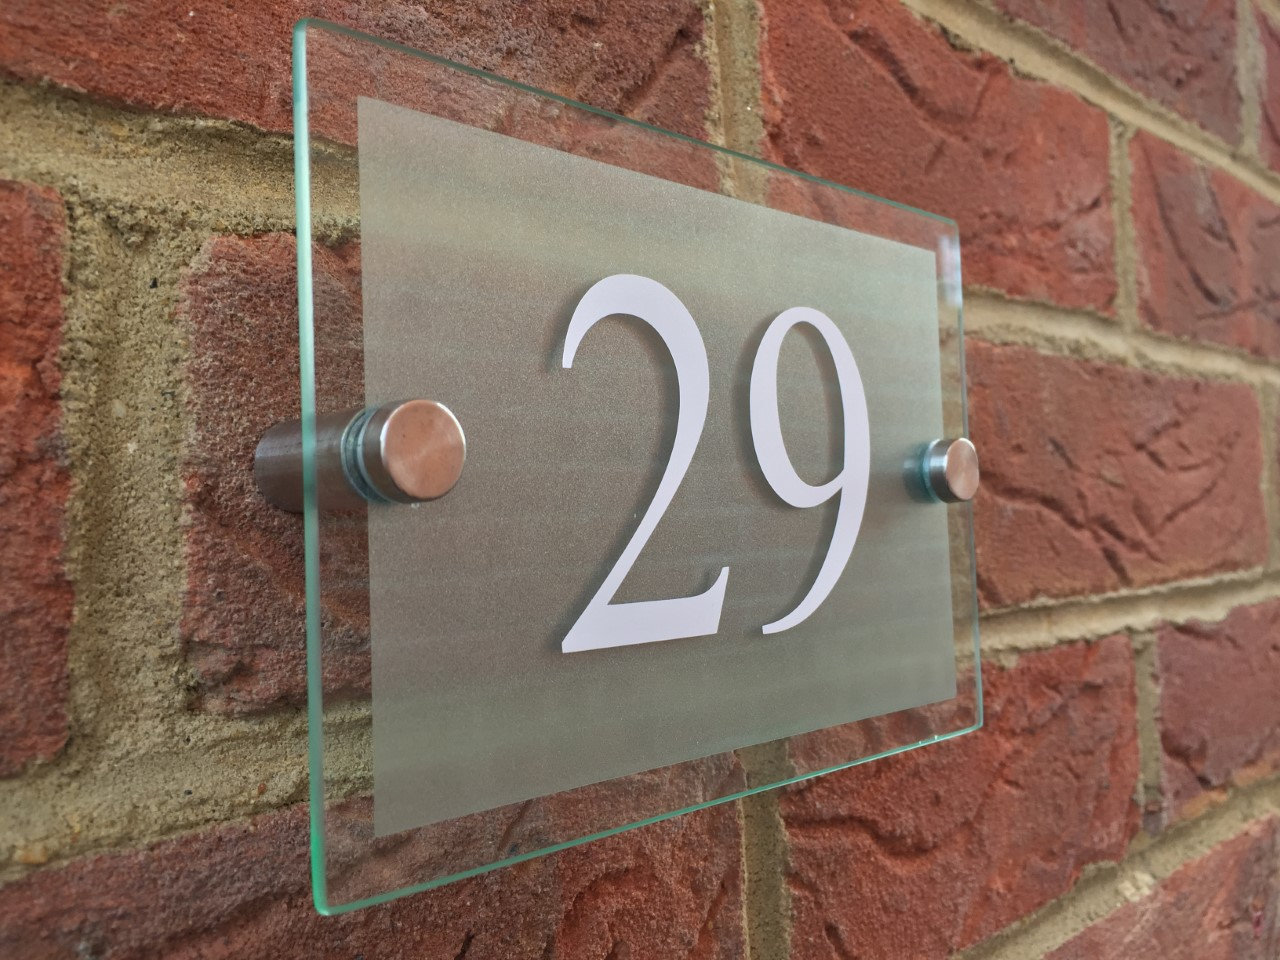 MODERN HOUSE SIGN PLAQUE DOOR NUMBER STREET GLASS EFFECT ACRYLIC HOUSE NAME 